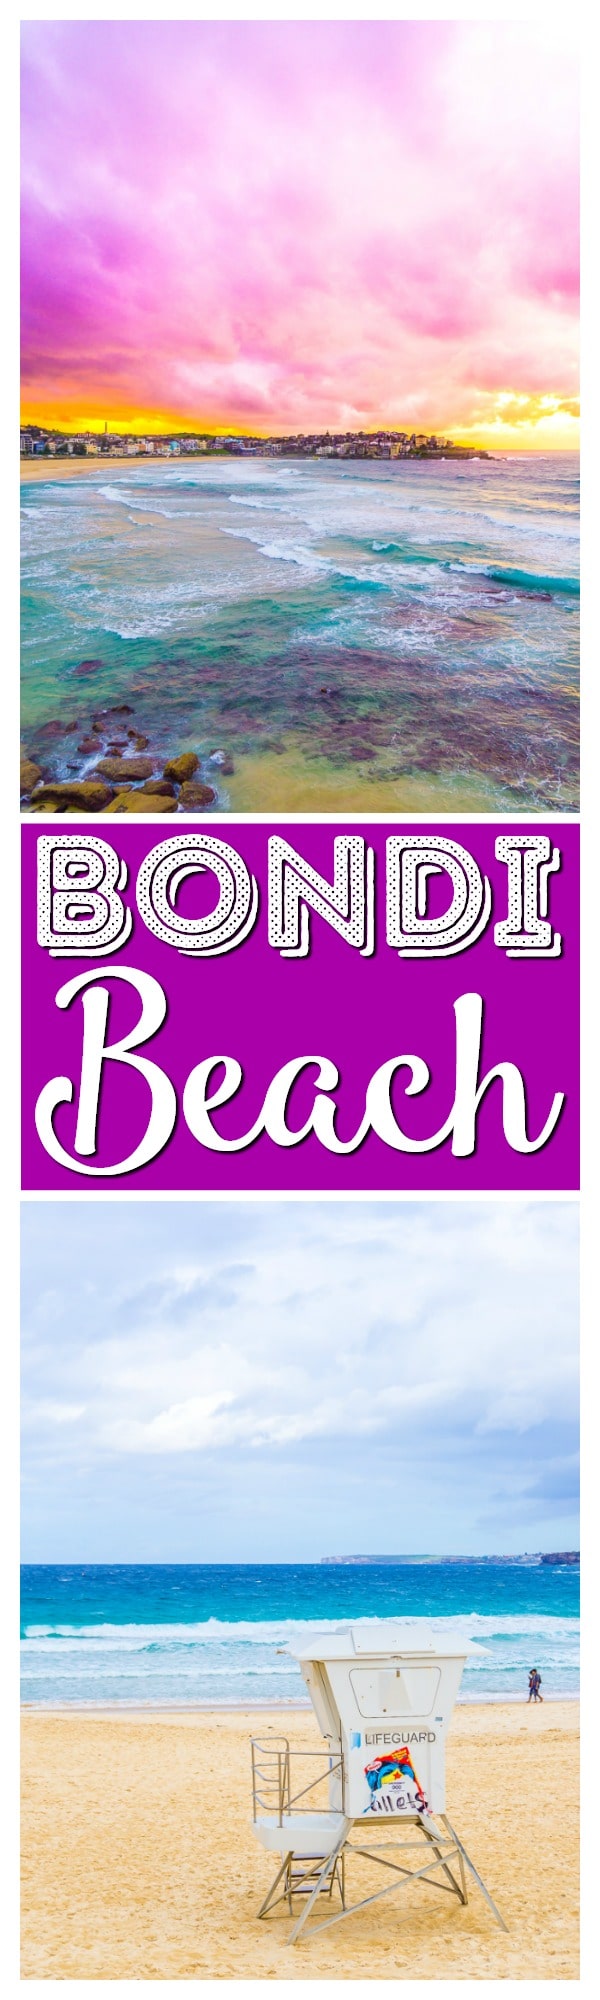 A Day At Bondi Beach is an absolute must when visiting Sydney, Australia. Go swimming, surfing, and eat your way along the boardwalk! via @sugarandsoulco